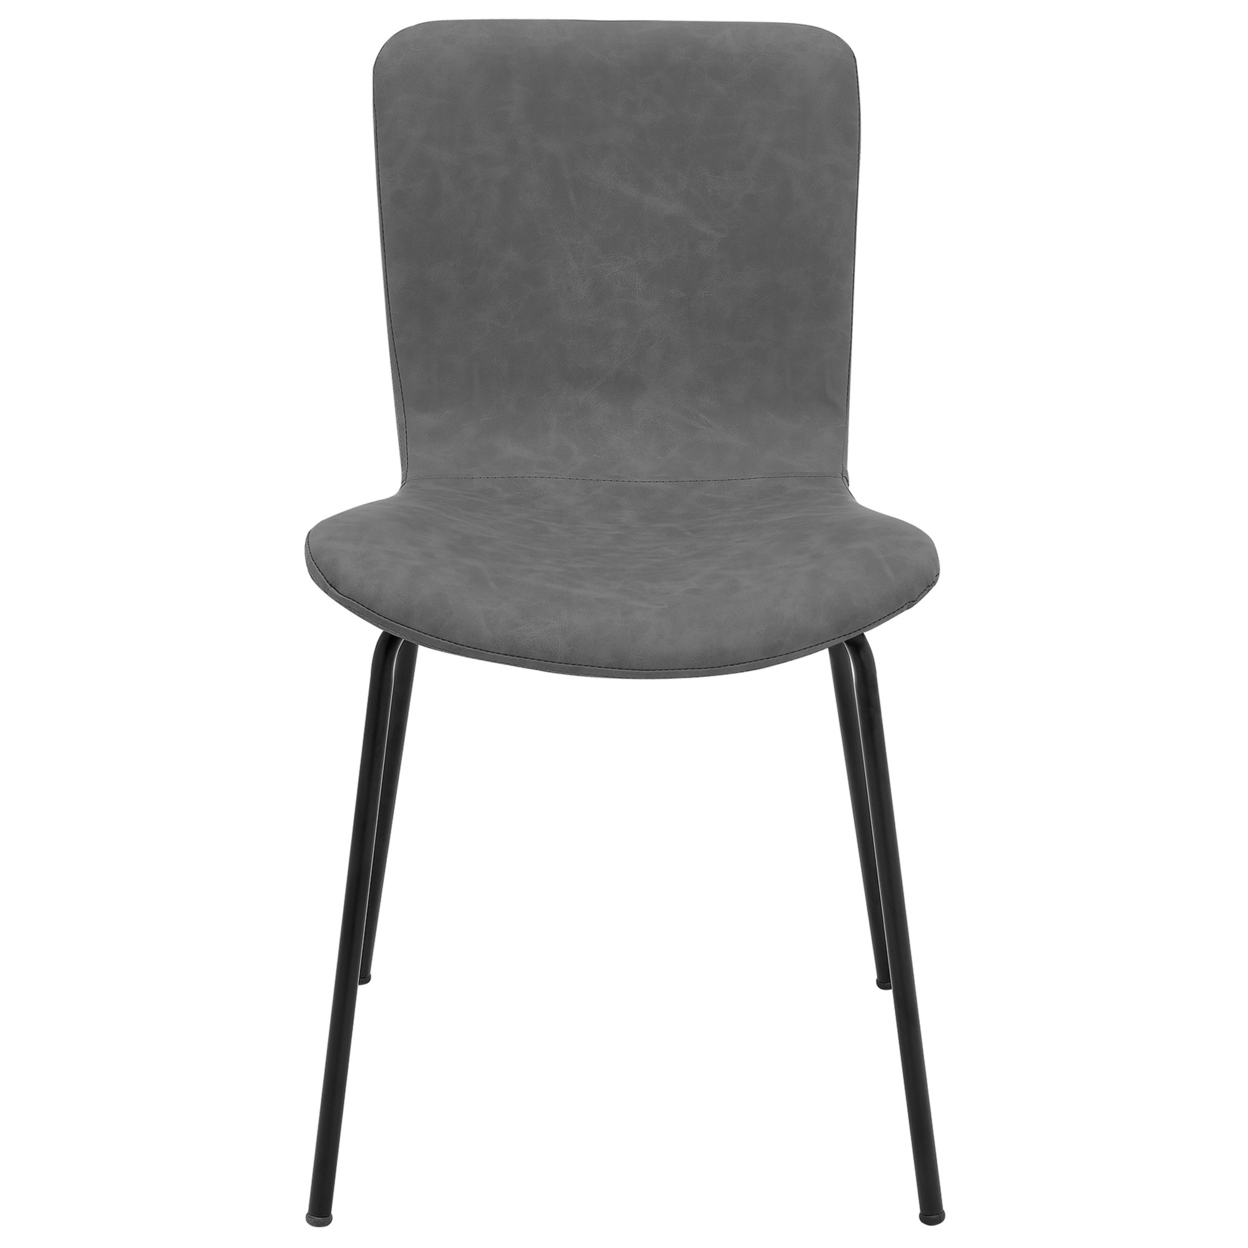 Metal And Leatherette Dining Chair, Set Of 2, Gray And Black- Saltoro Sherpi